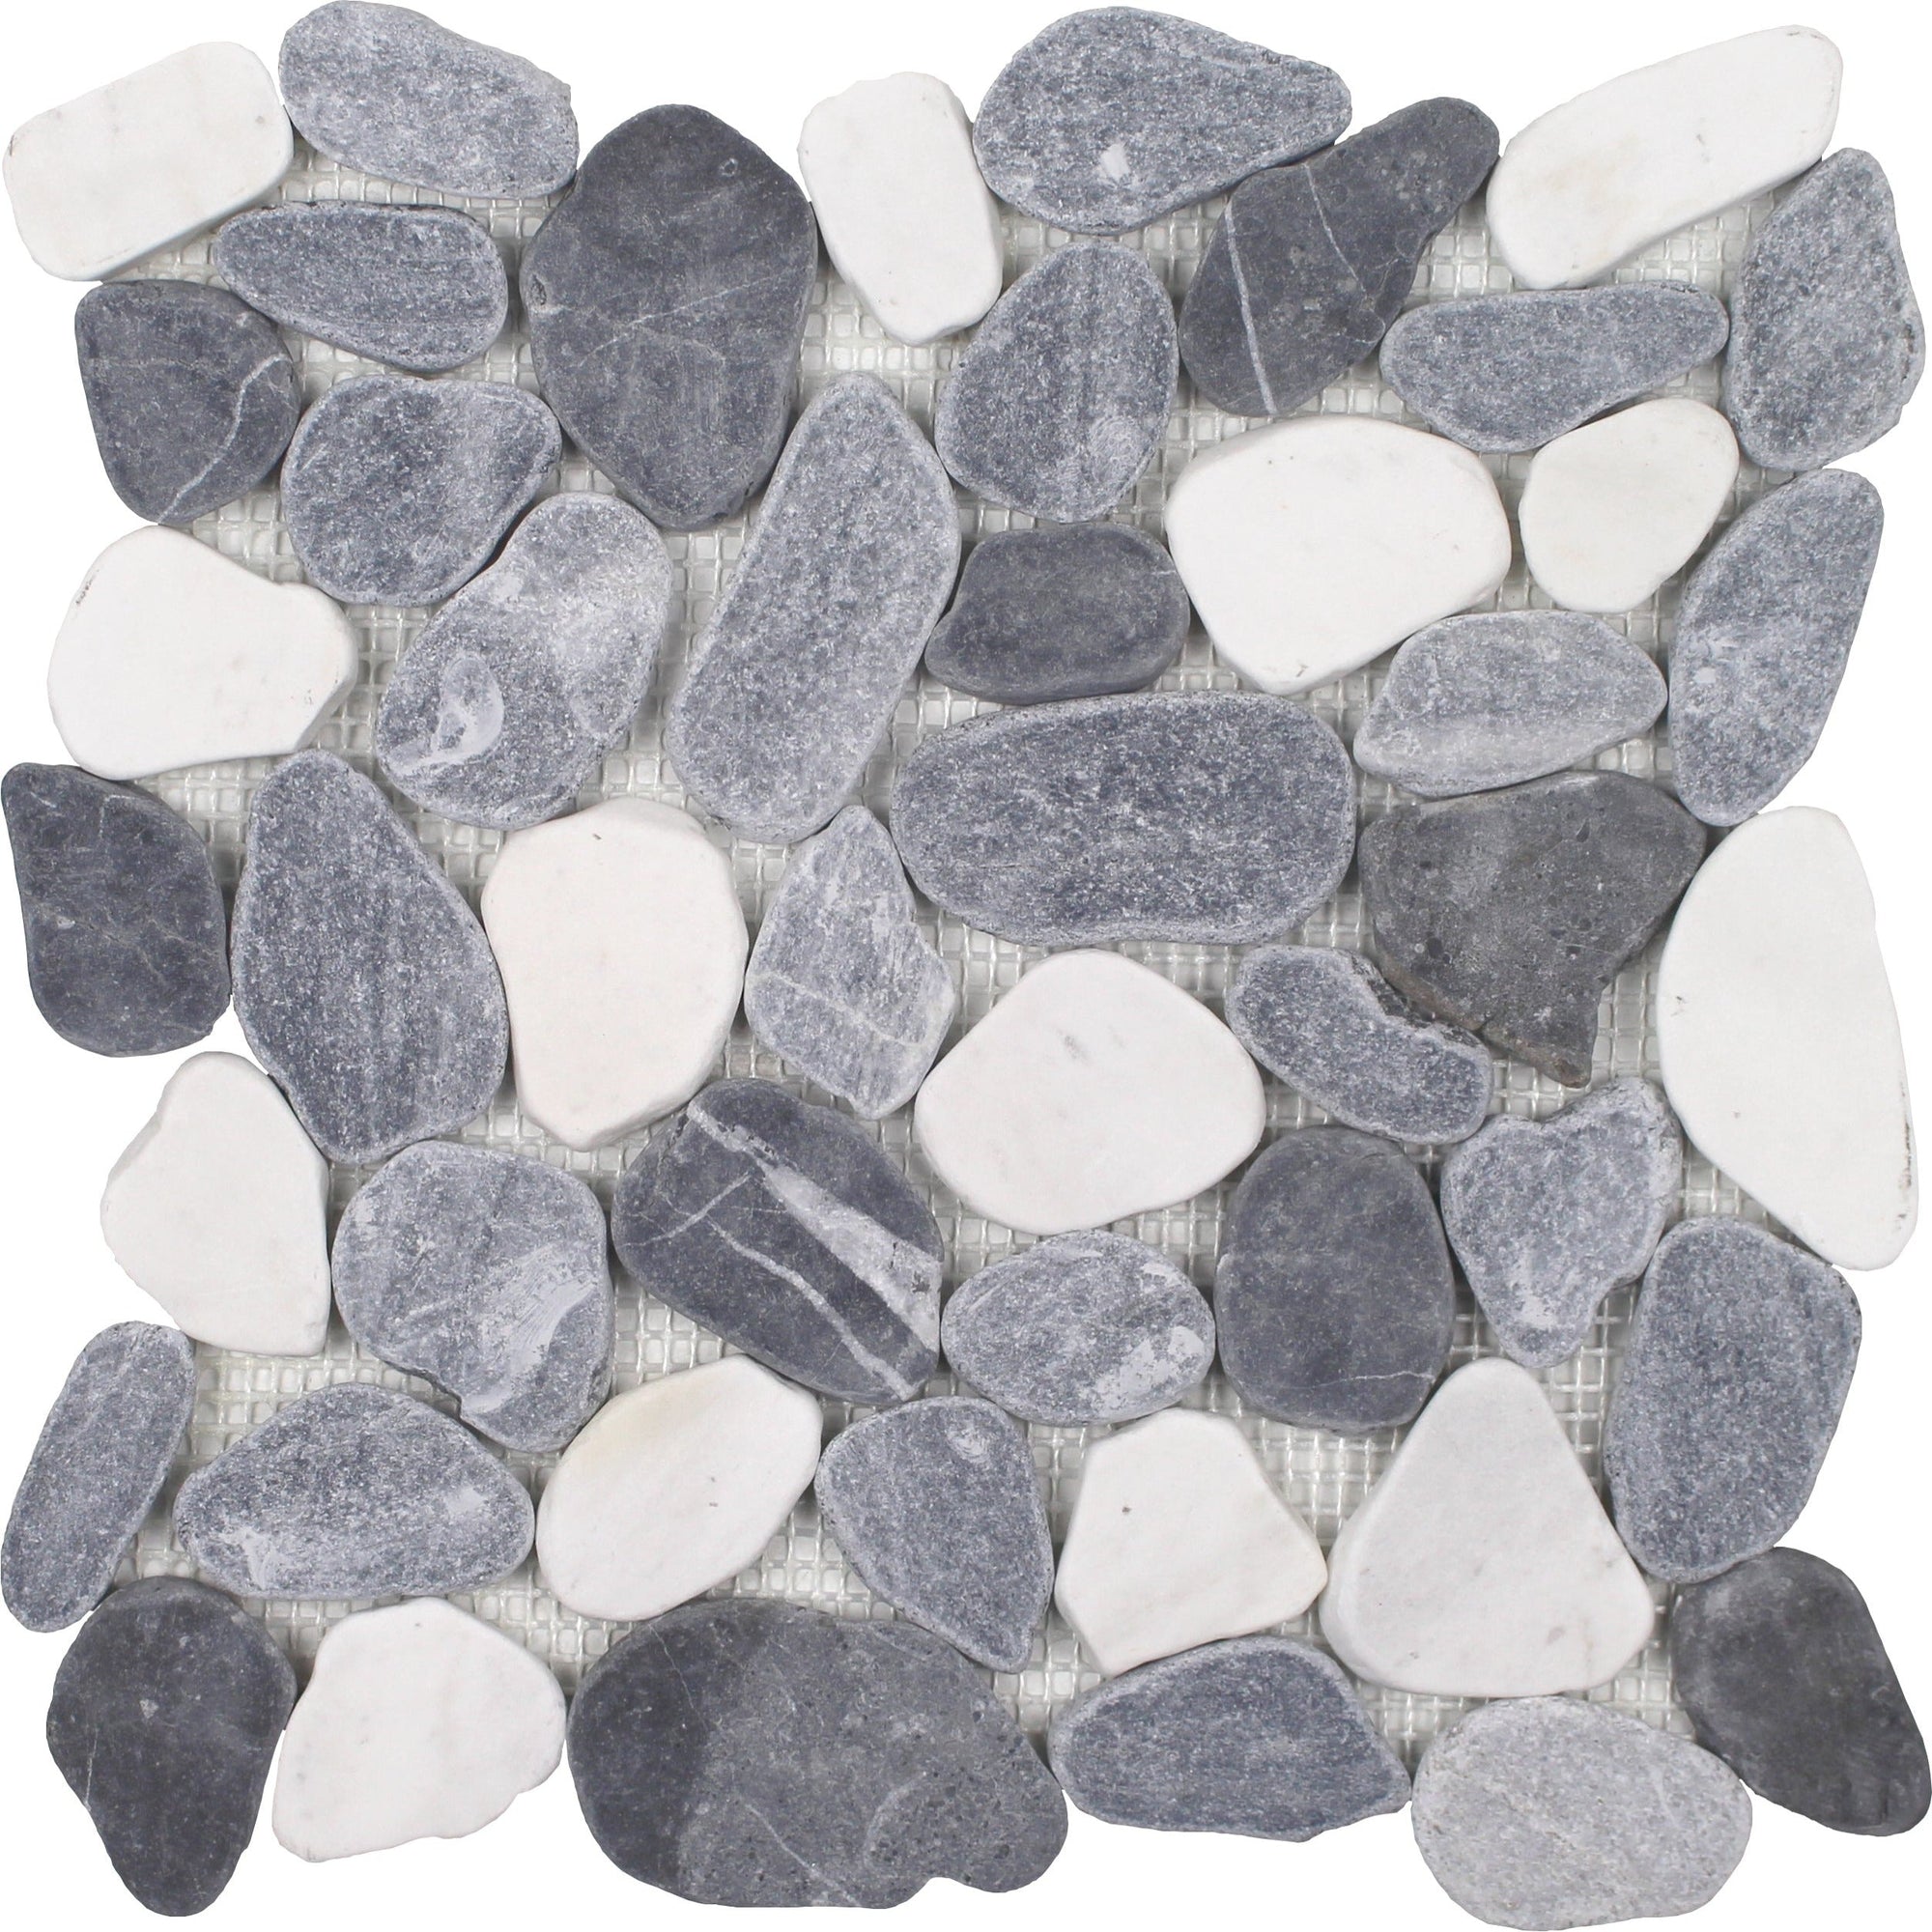 Tesoro - Beach Stones Collection - Sliced Pebble Mosaic - White, Blue and Grey